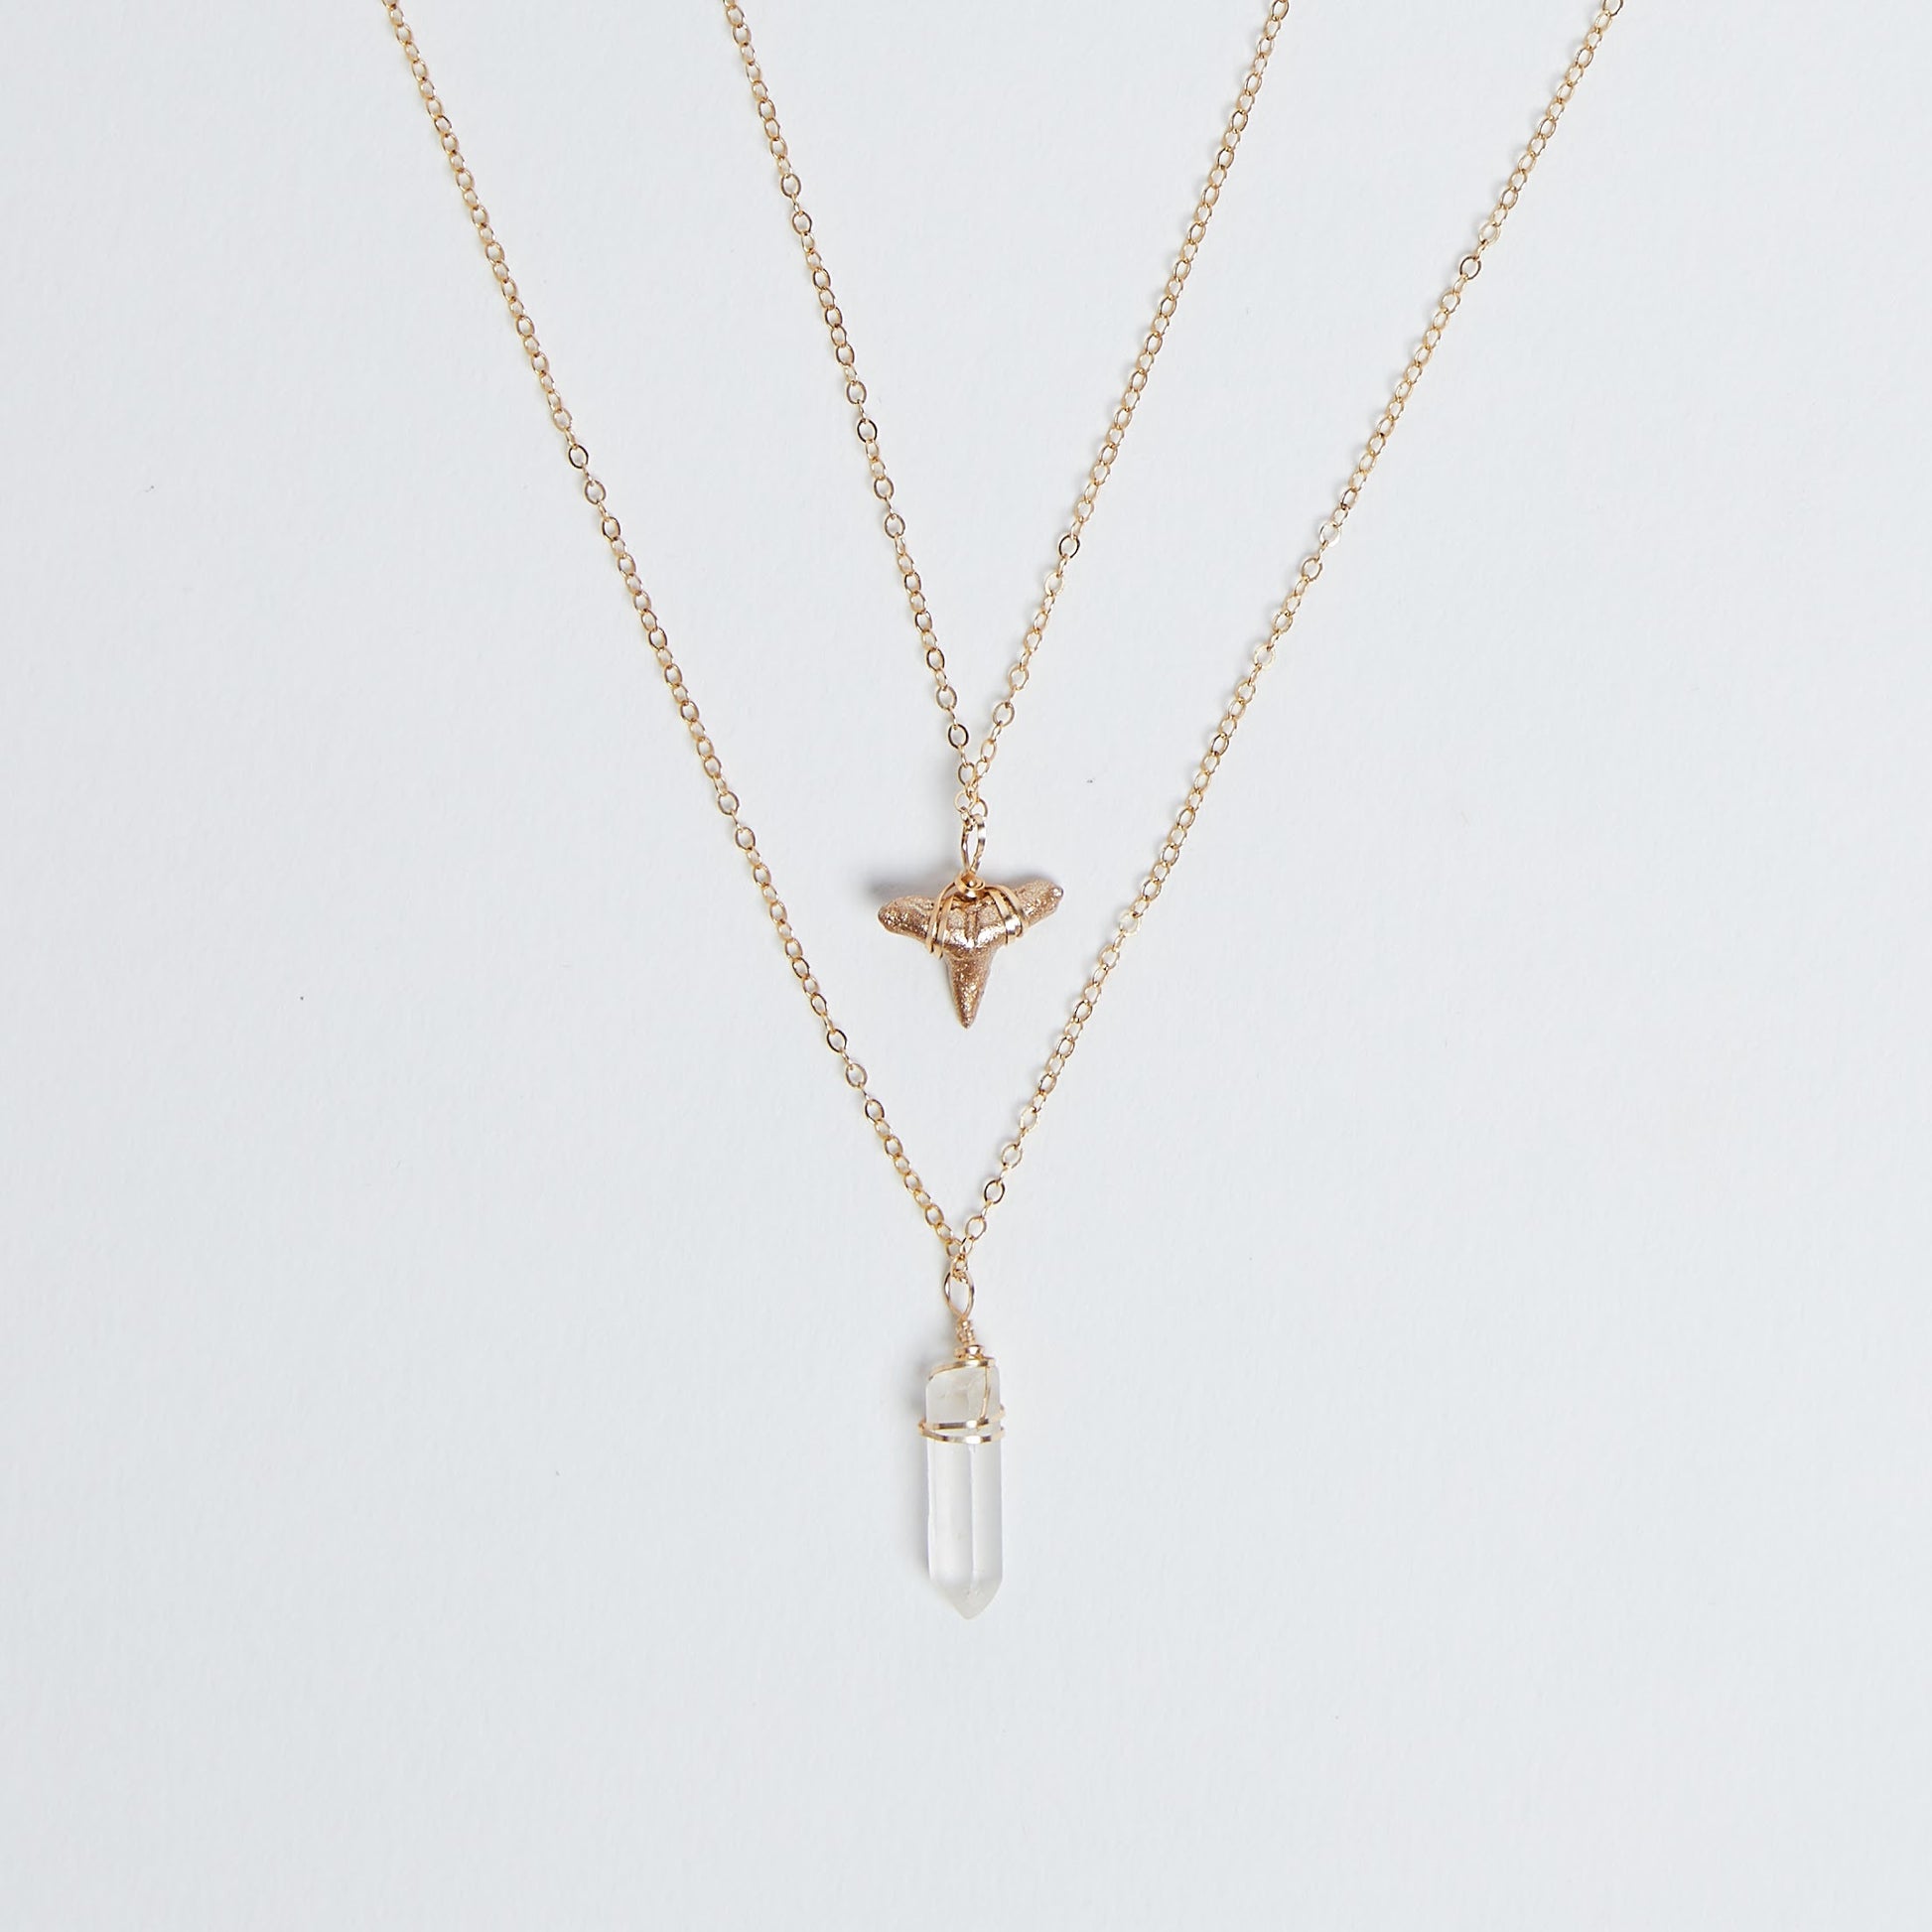 2 layer gold shark tooth necklace with quartz crystal pendant